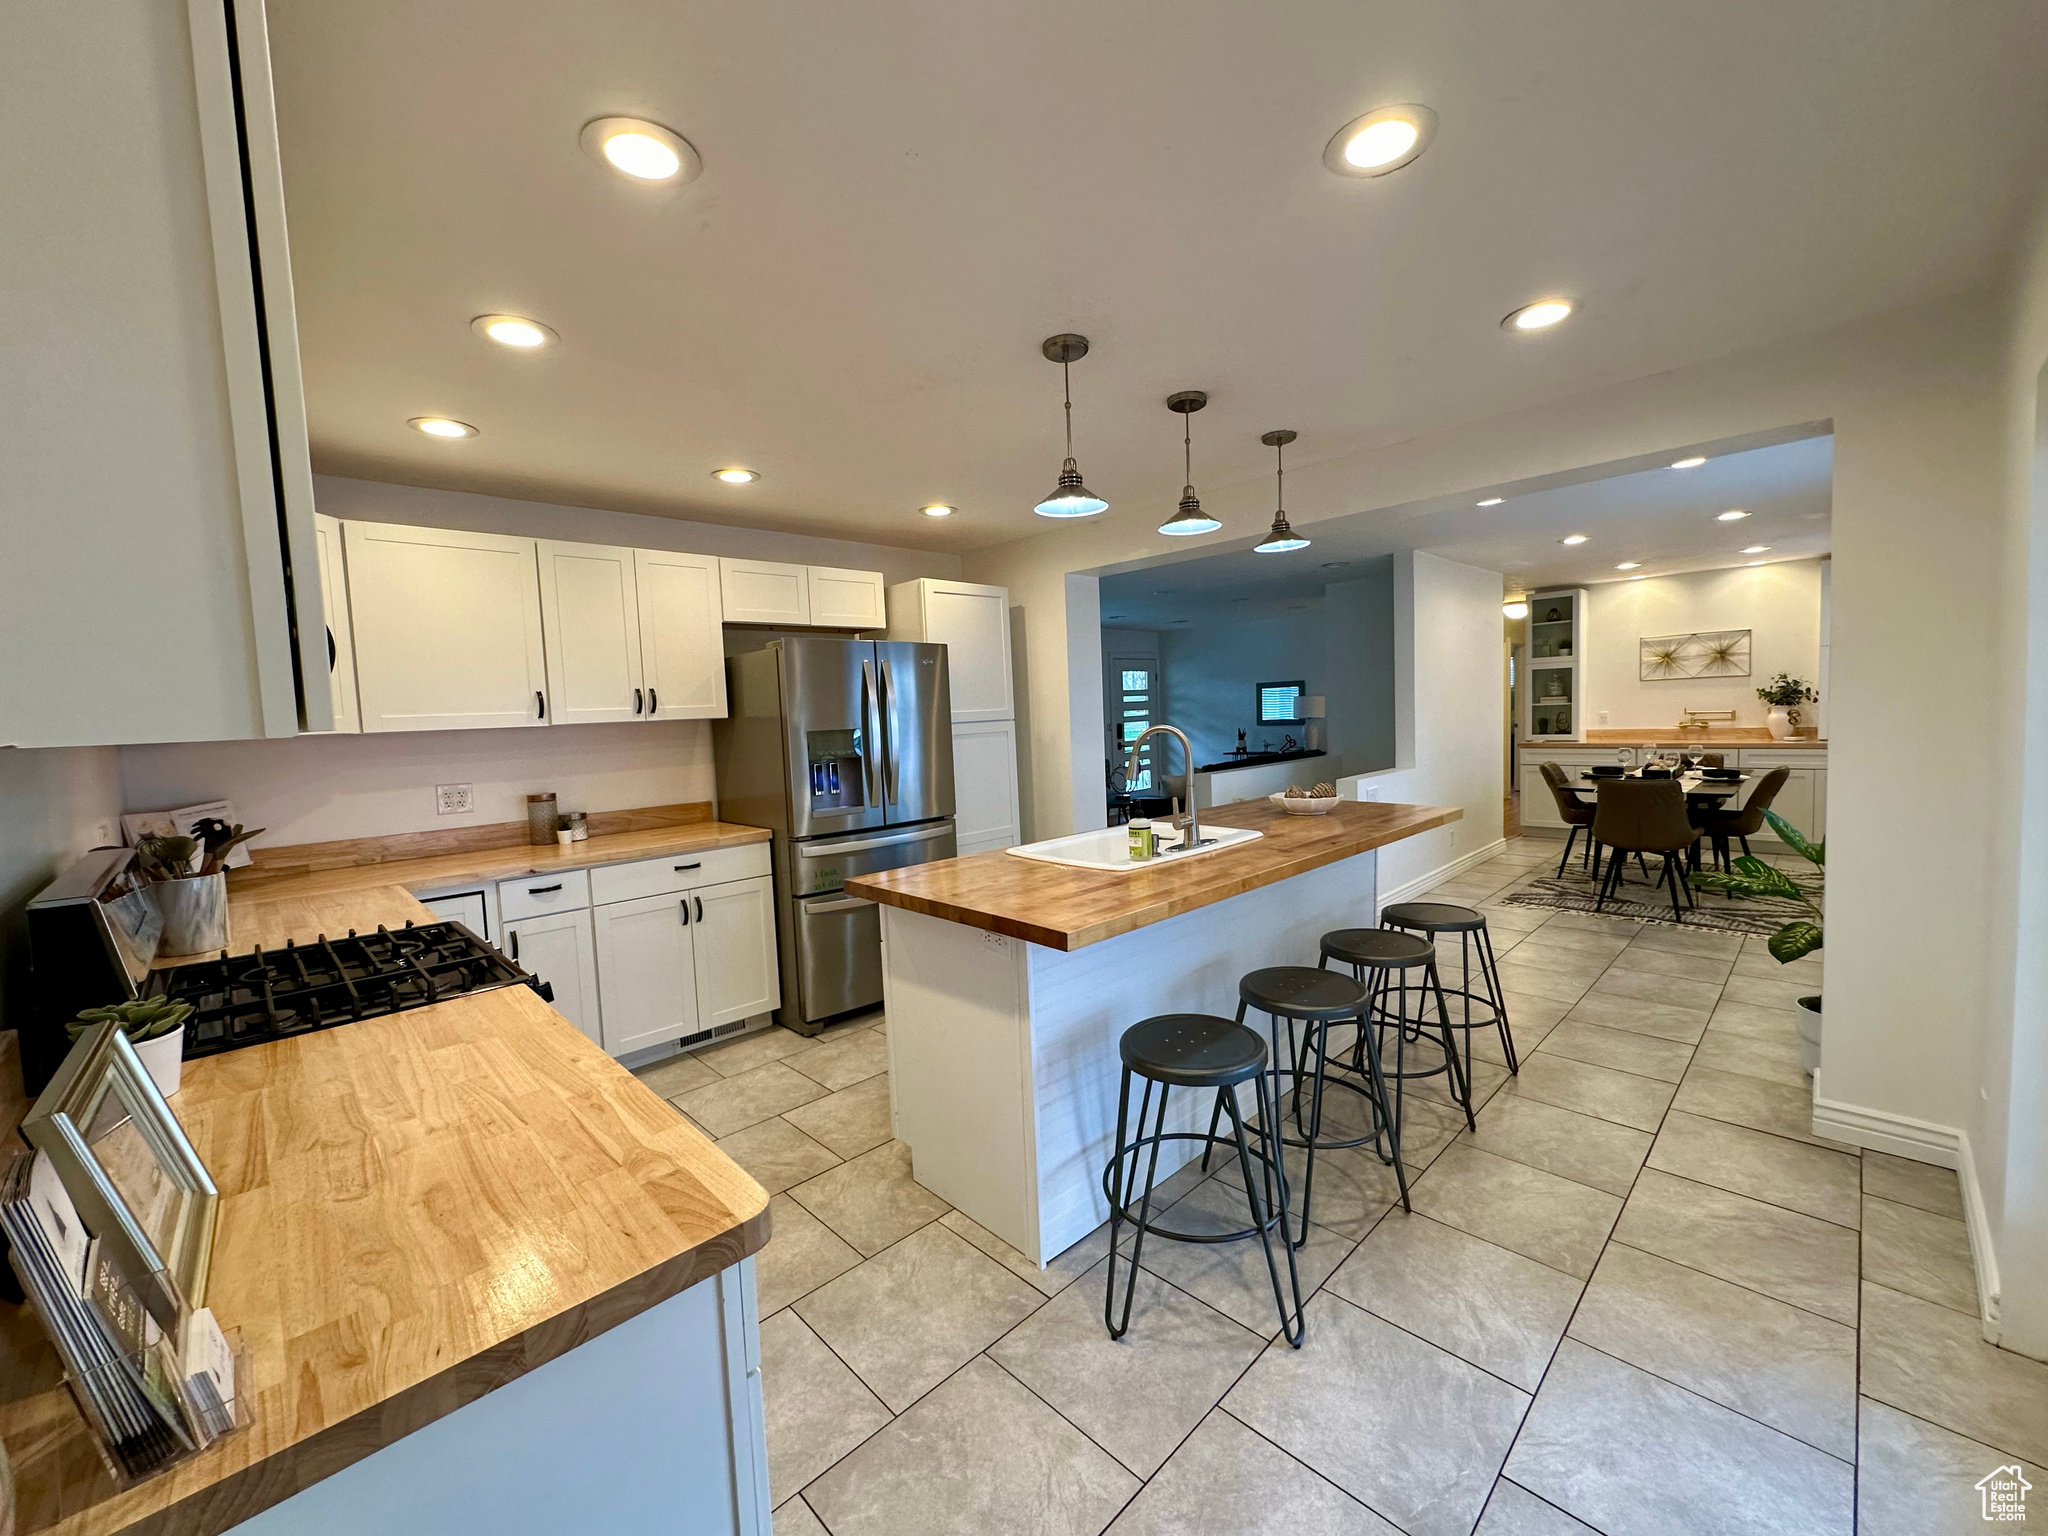 Kitchen featuring stainless steel fridge with ice dispenser, hanging light fixtures, an island with sink, white cabinets, and wood counters